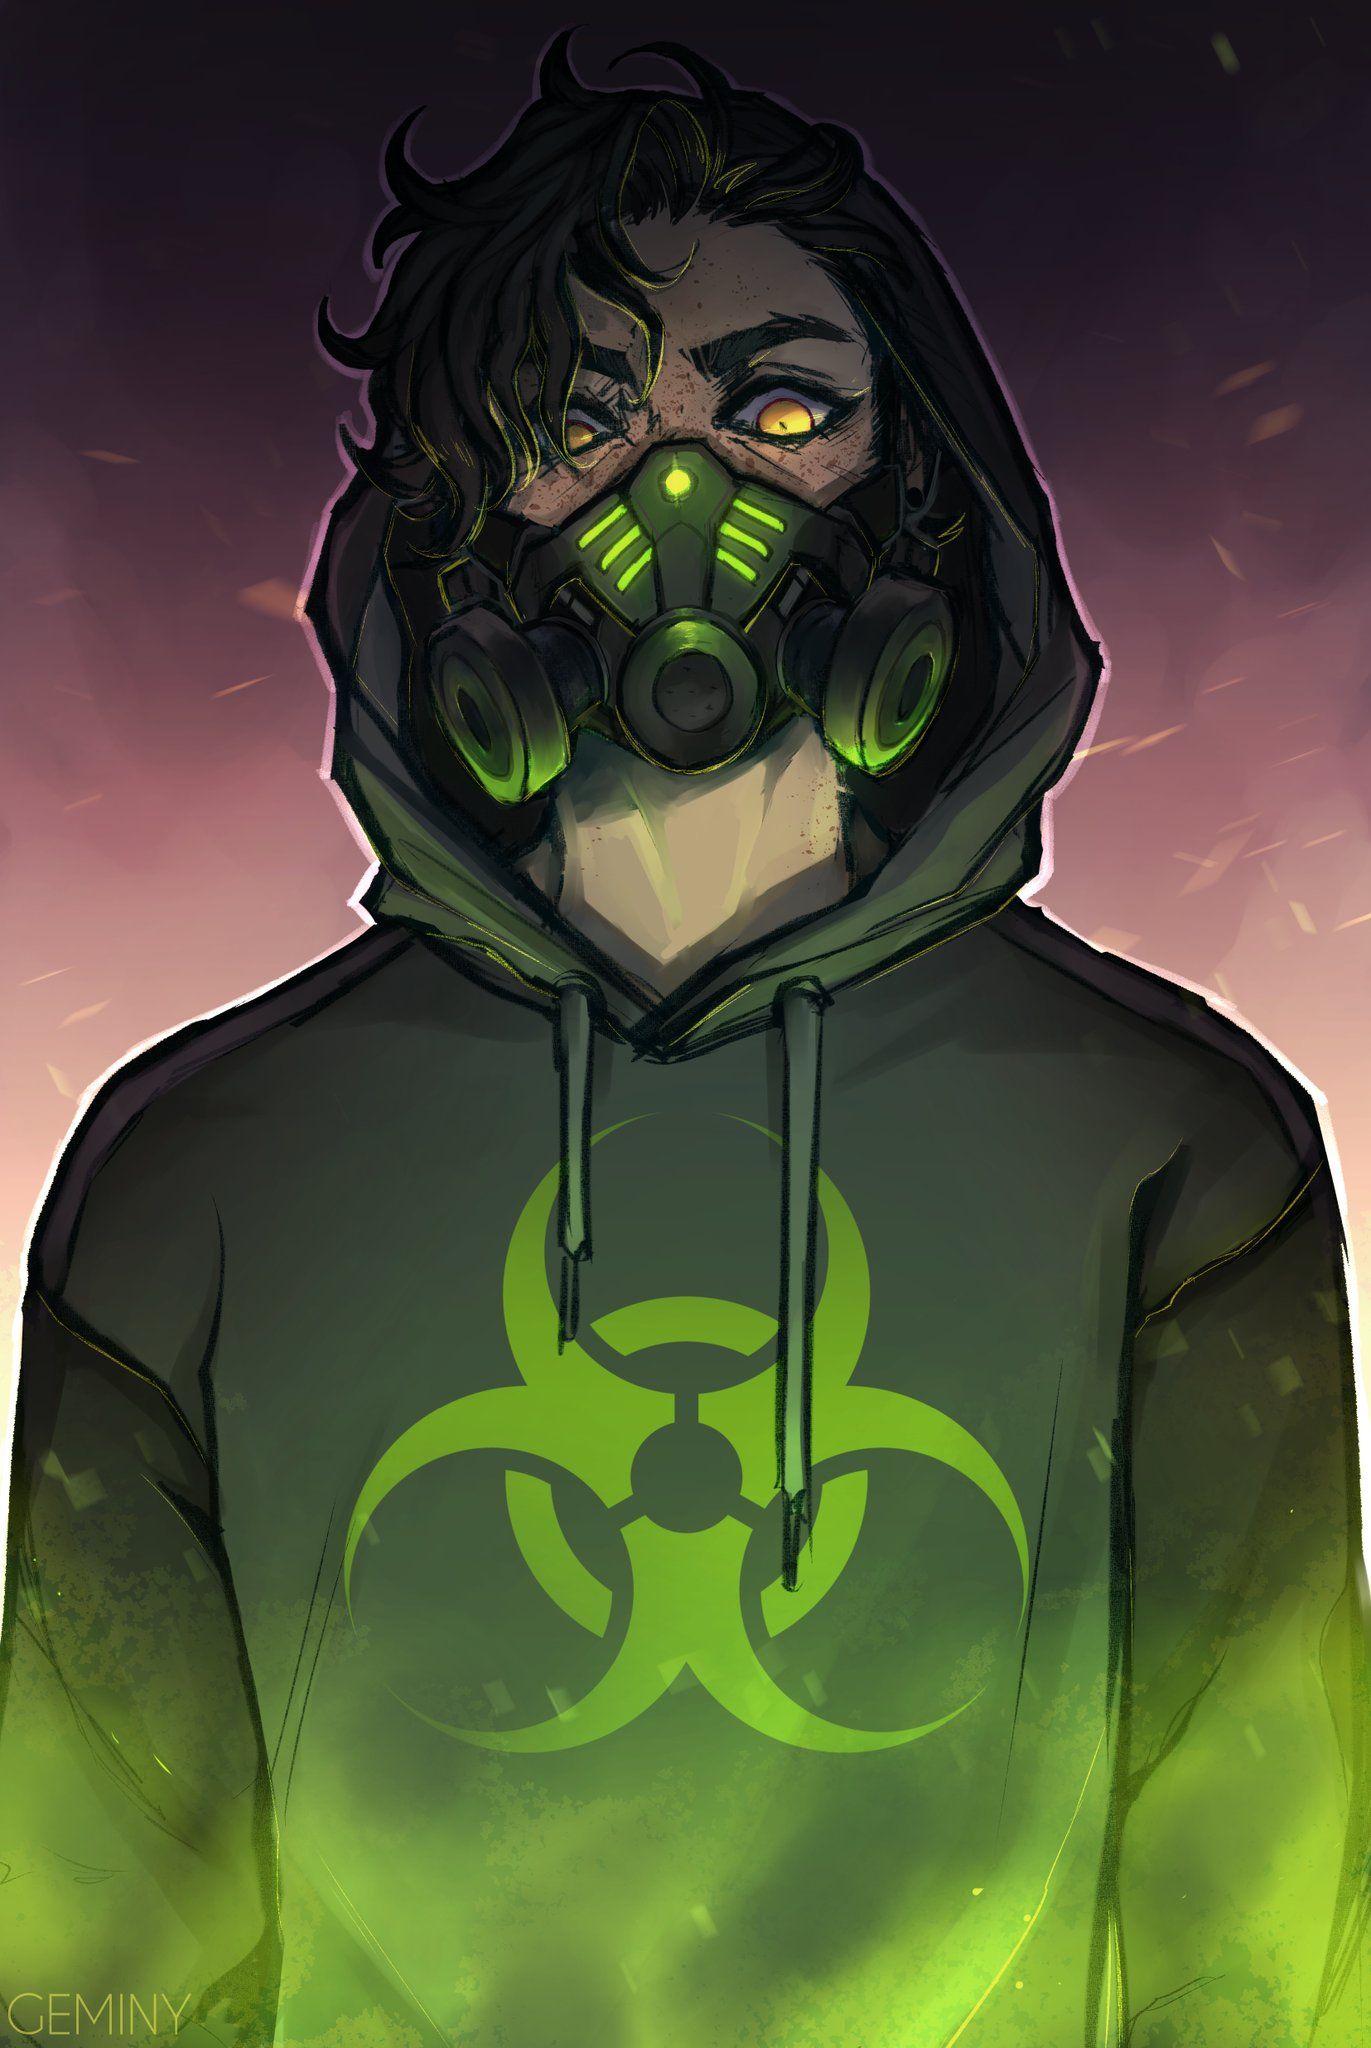 Anime Boy With Mask Clipart  Anime Boy With Gas Mask Transparent PNG   1000x703  Free Download on NicePNG